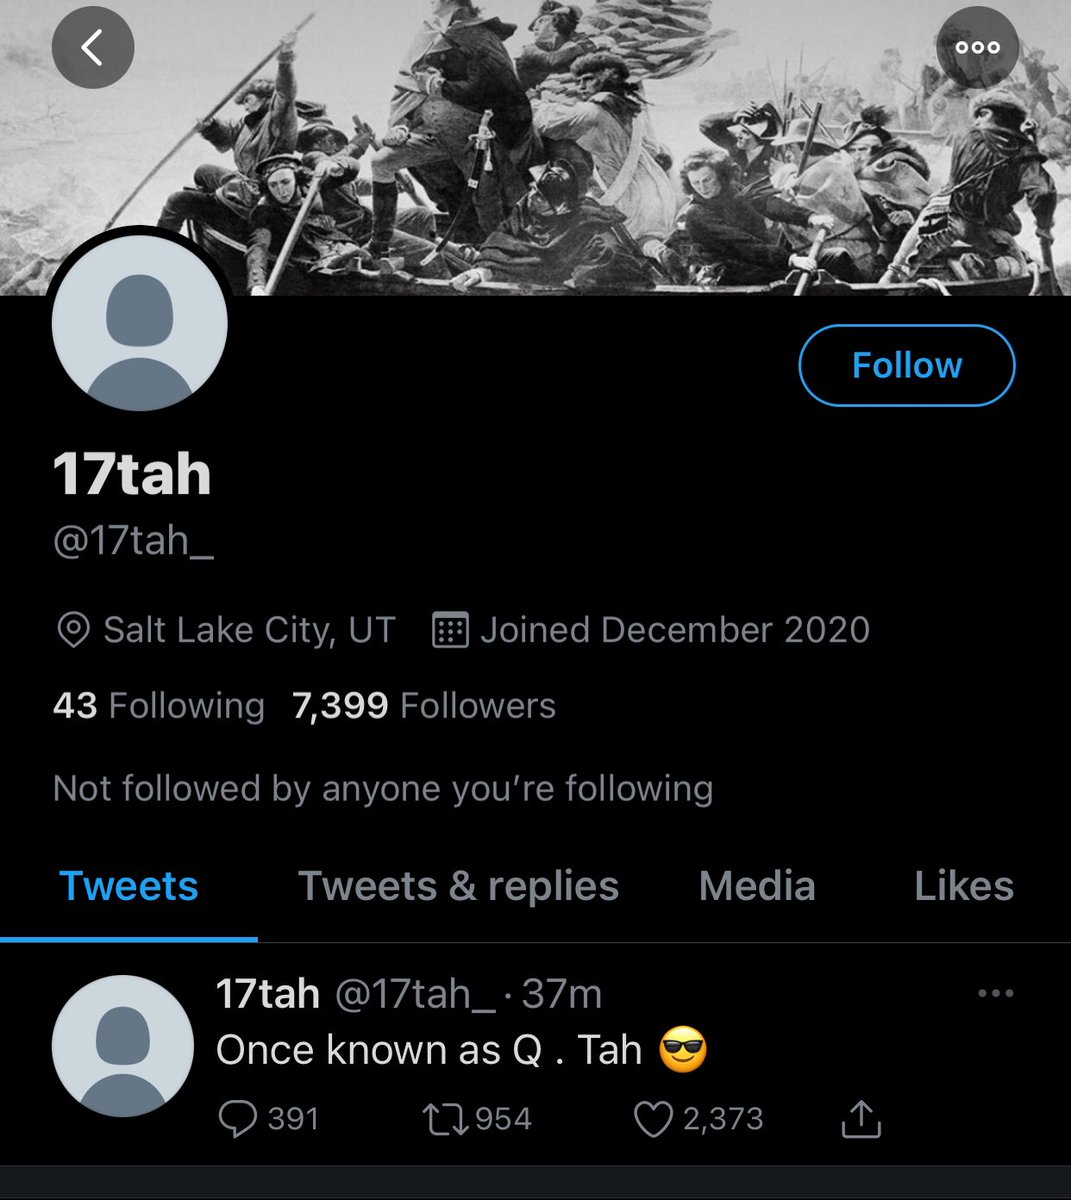 72. Twiiter’s ban evasion prevention measures are so intimidating that Qtah is back on a ban evasion account with a tweet making sure people know it’s him and that he is ban evading.